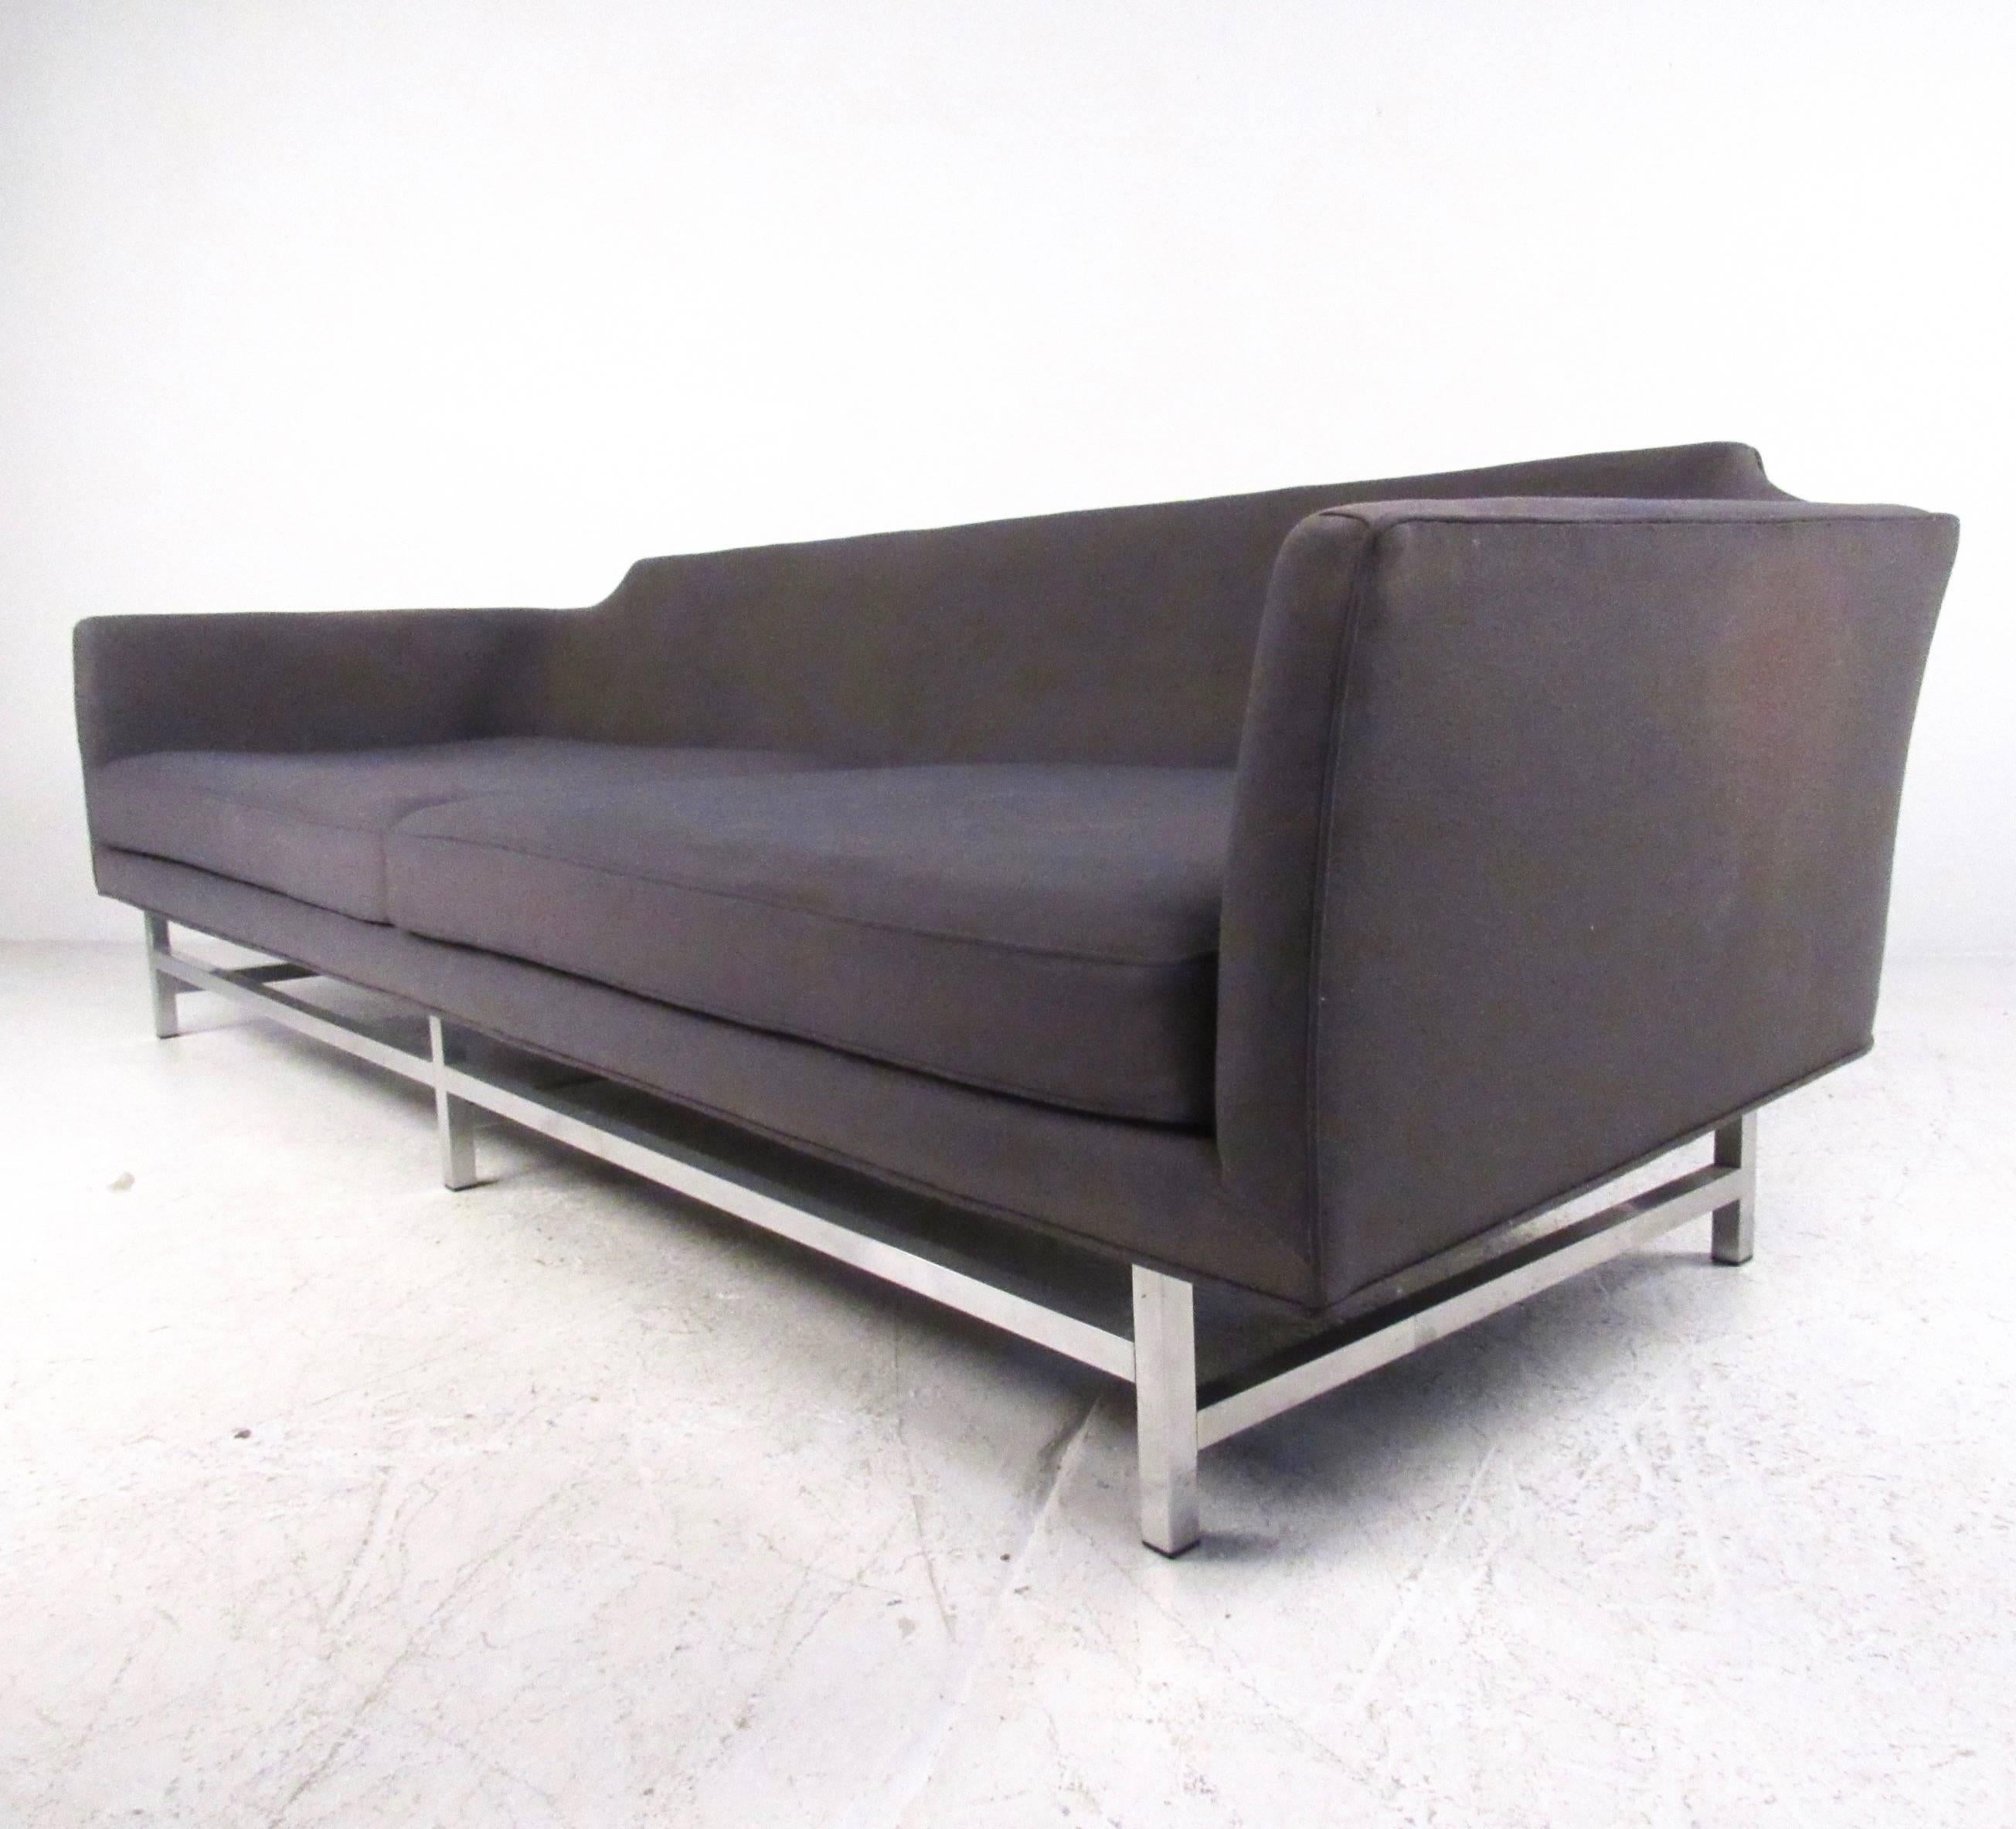 This oversized contemporary modern sofa features Mid-Century style design with unique cutaway back and spacious upholstered seating area. Wonderfully comfortable and long sofa perfect for any seating area. Please confirm item location (NY or NJ).